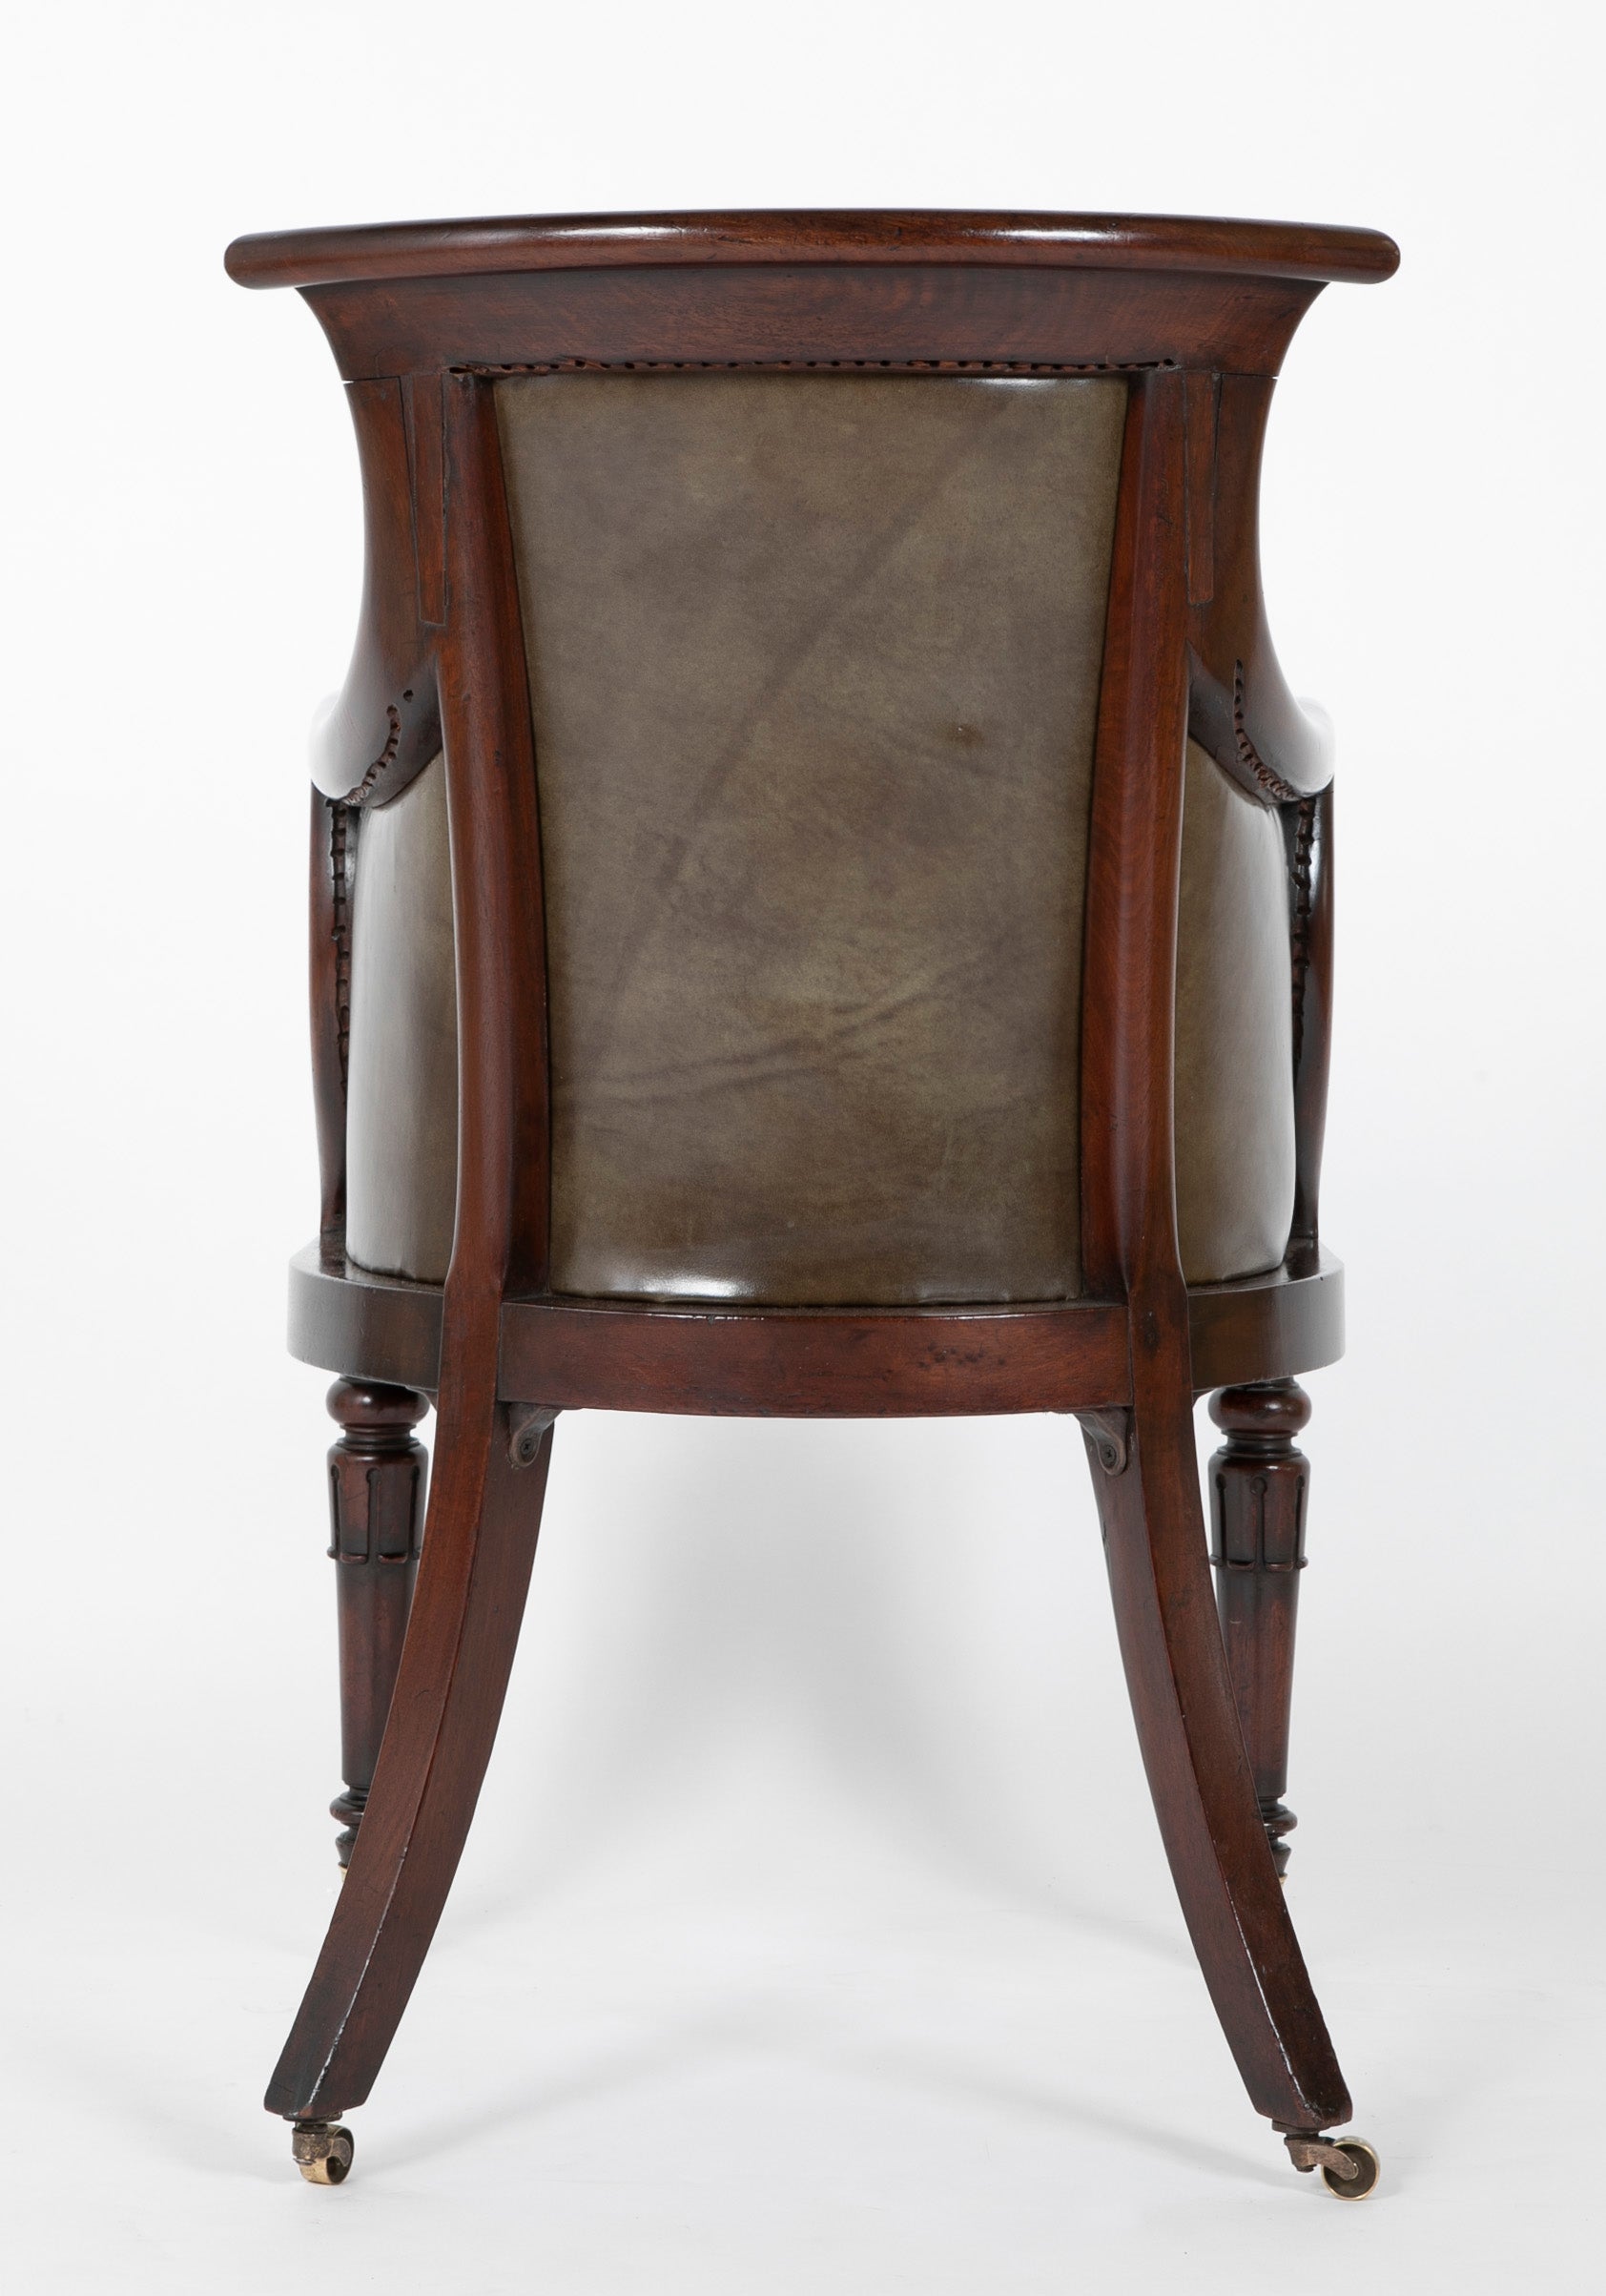 A Mahogany Library Chair with Curled & Carved Crest Upholstered in Leather